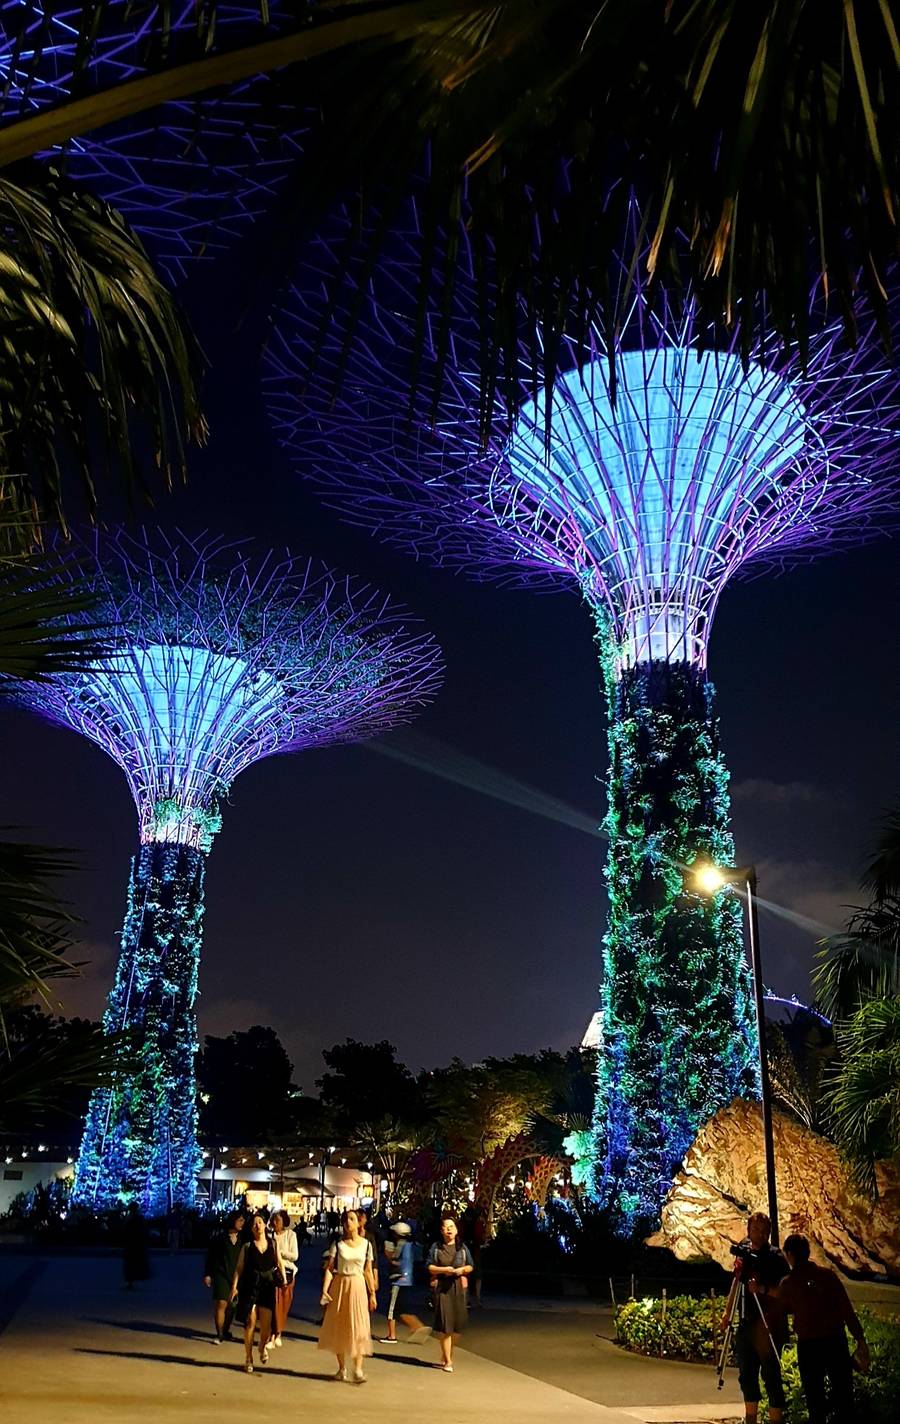 Lights, nature and super trees at Gardens by the Bay